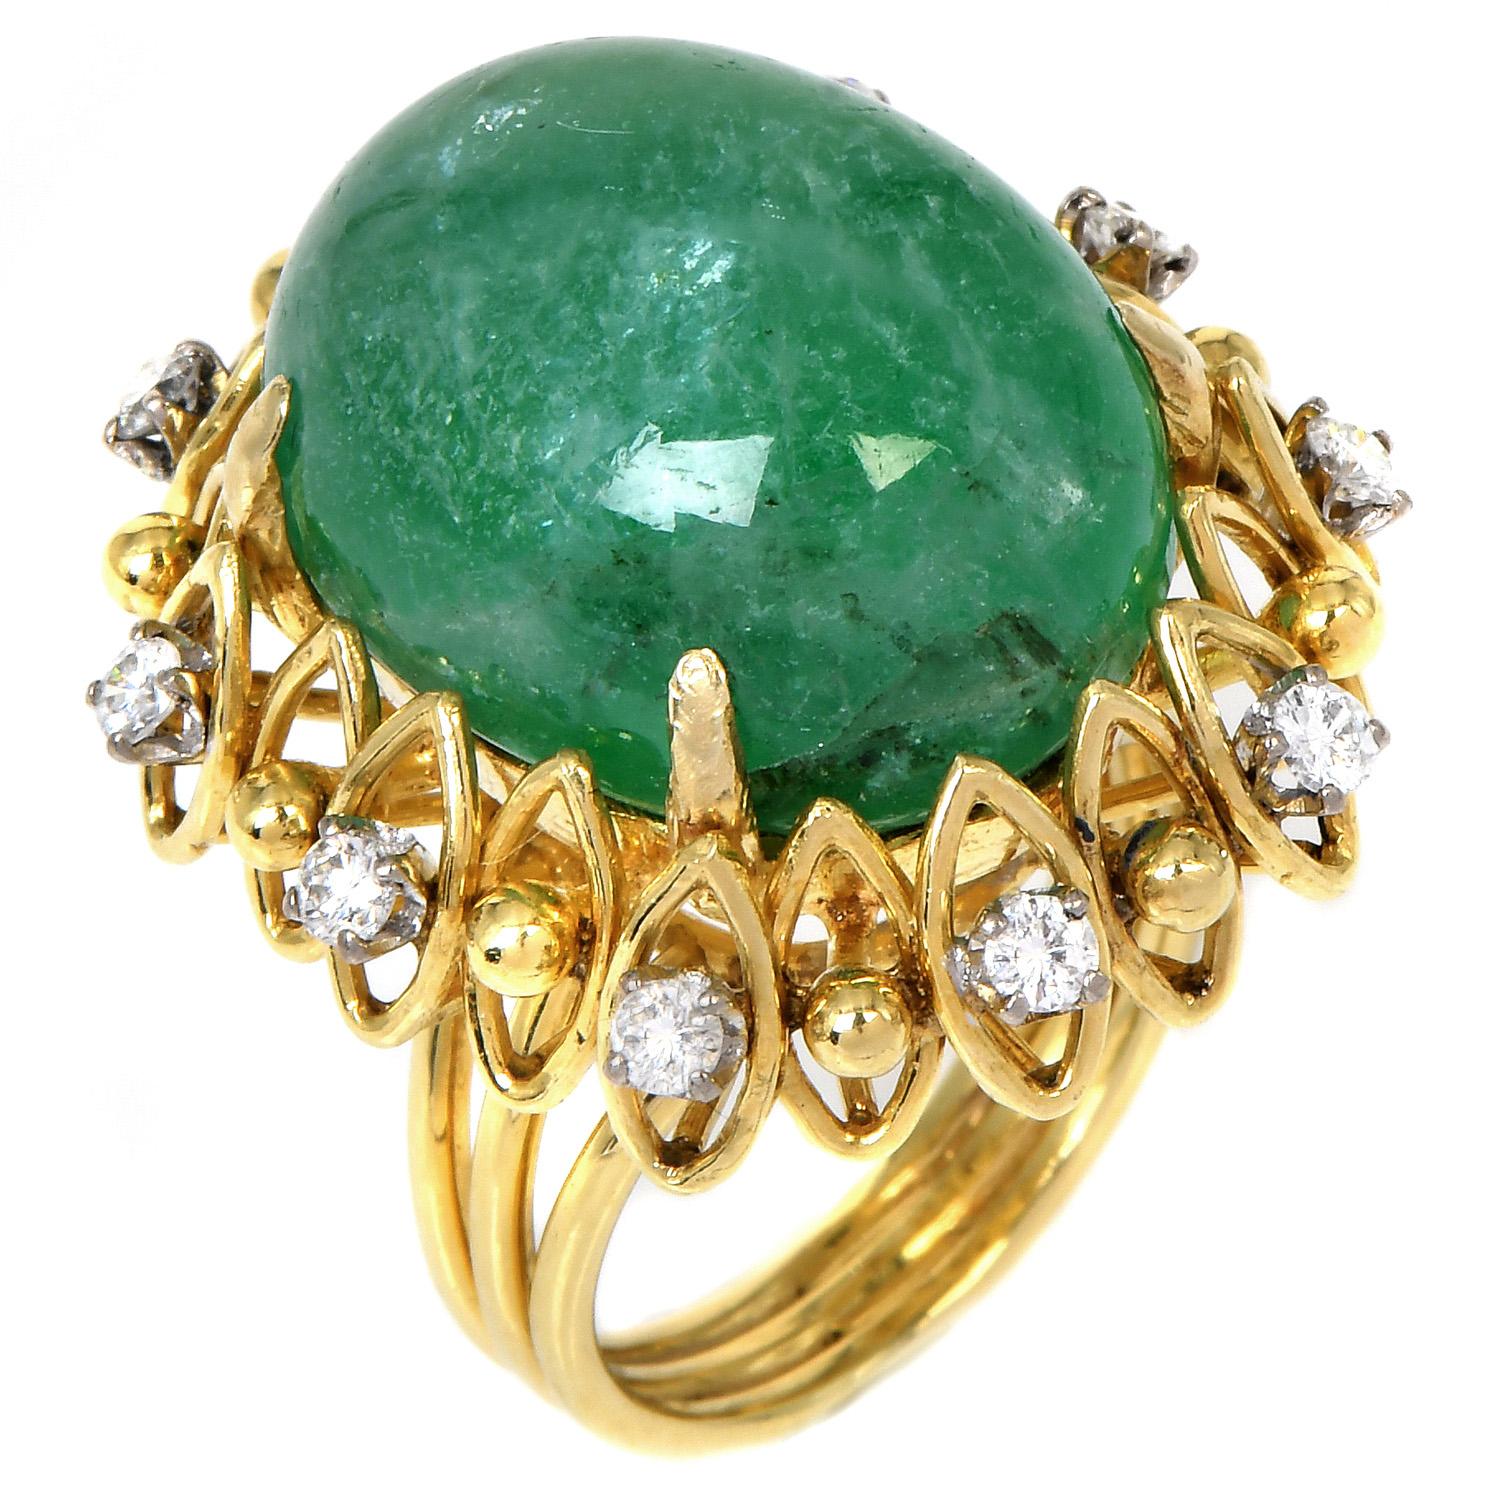 Cabochon 1980s GIA Green Beryl Diamond 18K Yellow Gold Flower Unique Cocktail Ring